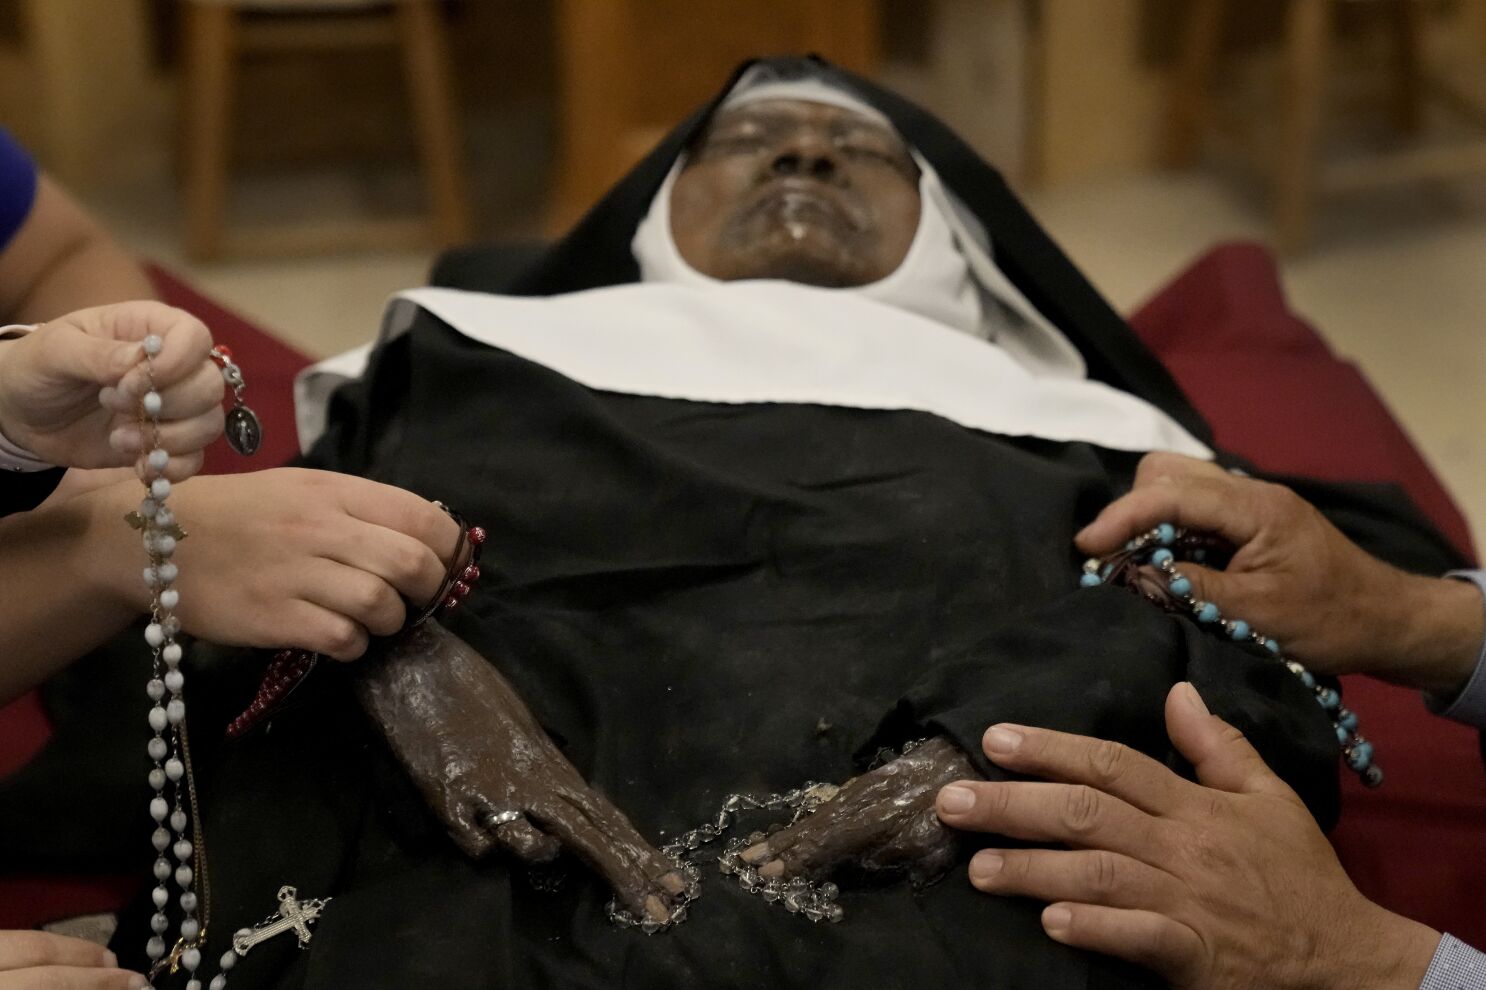 Nun whose body shows little decay since 2019 death draws hundreds